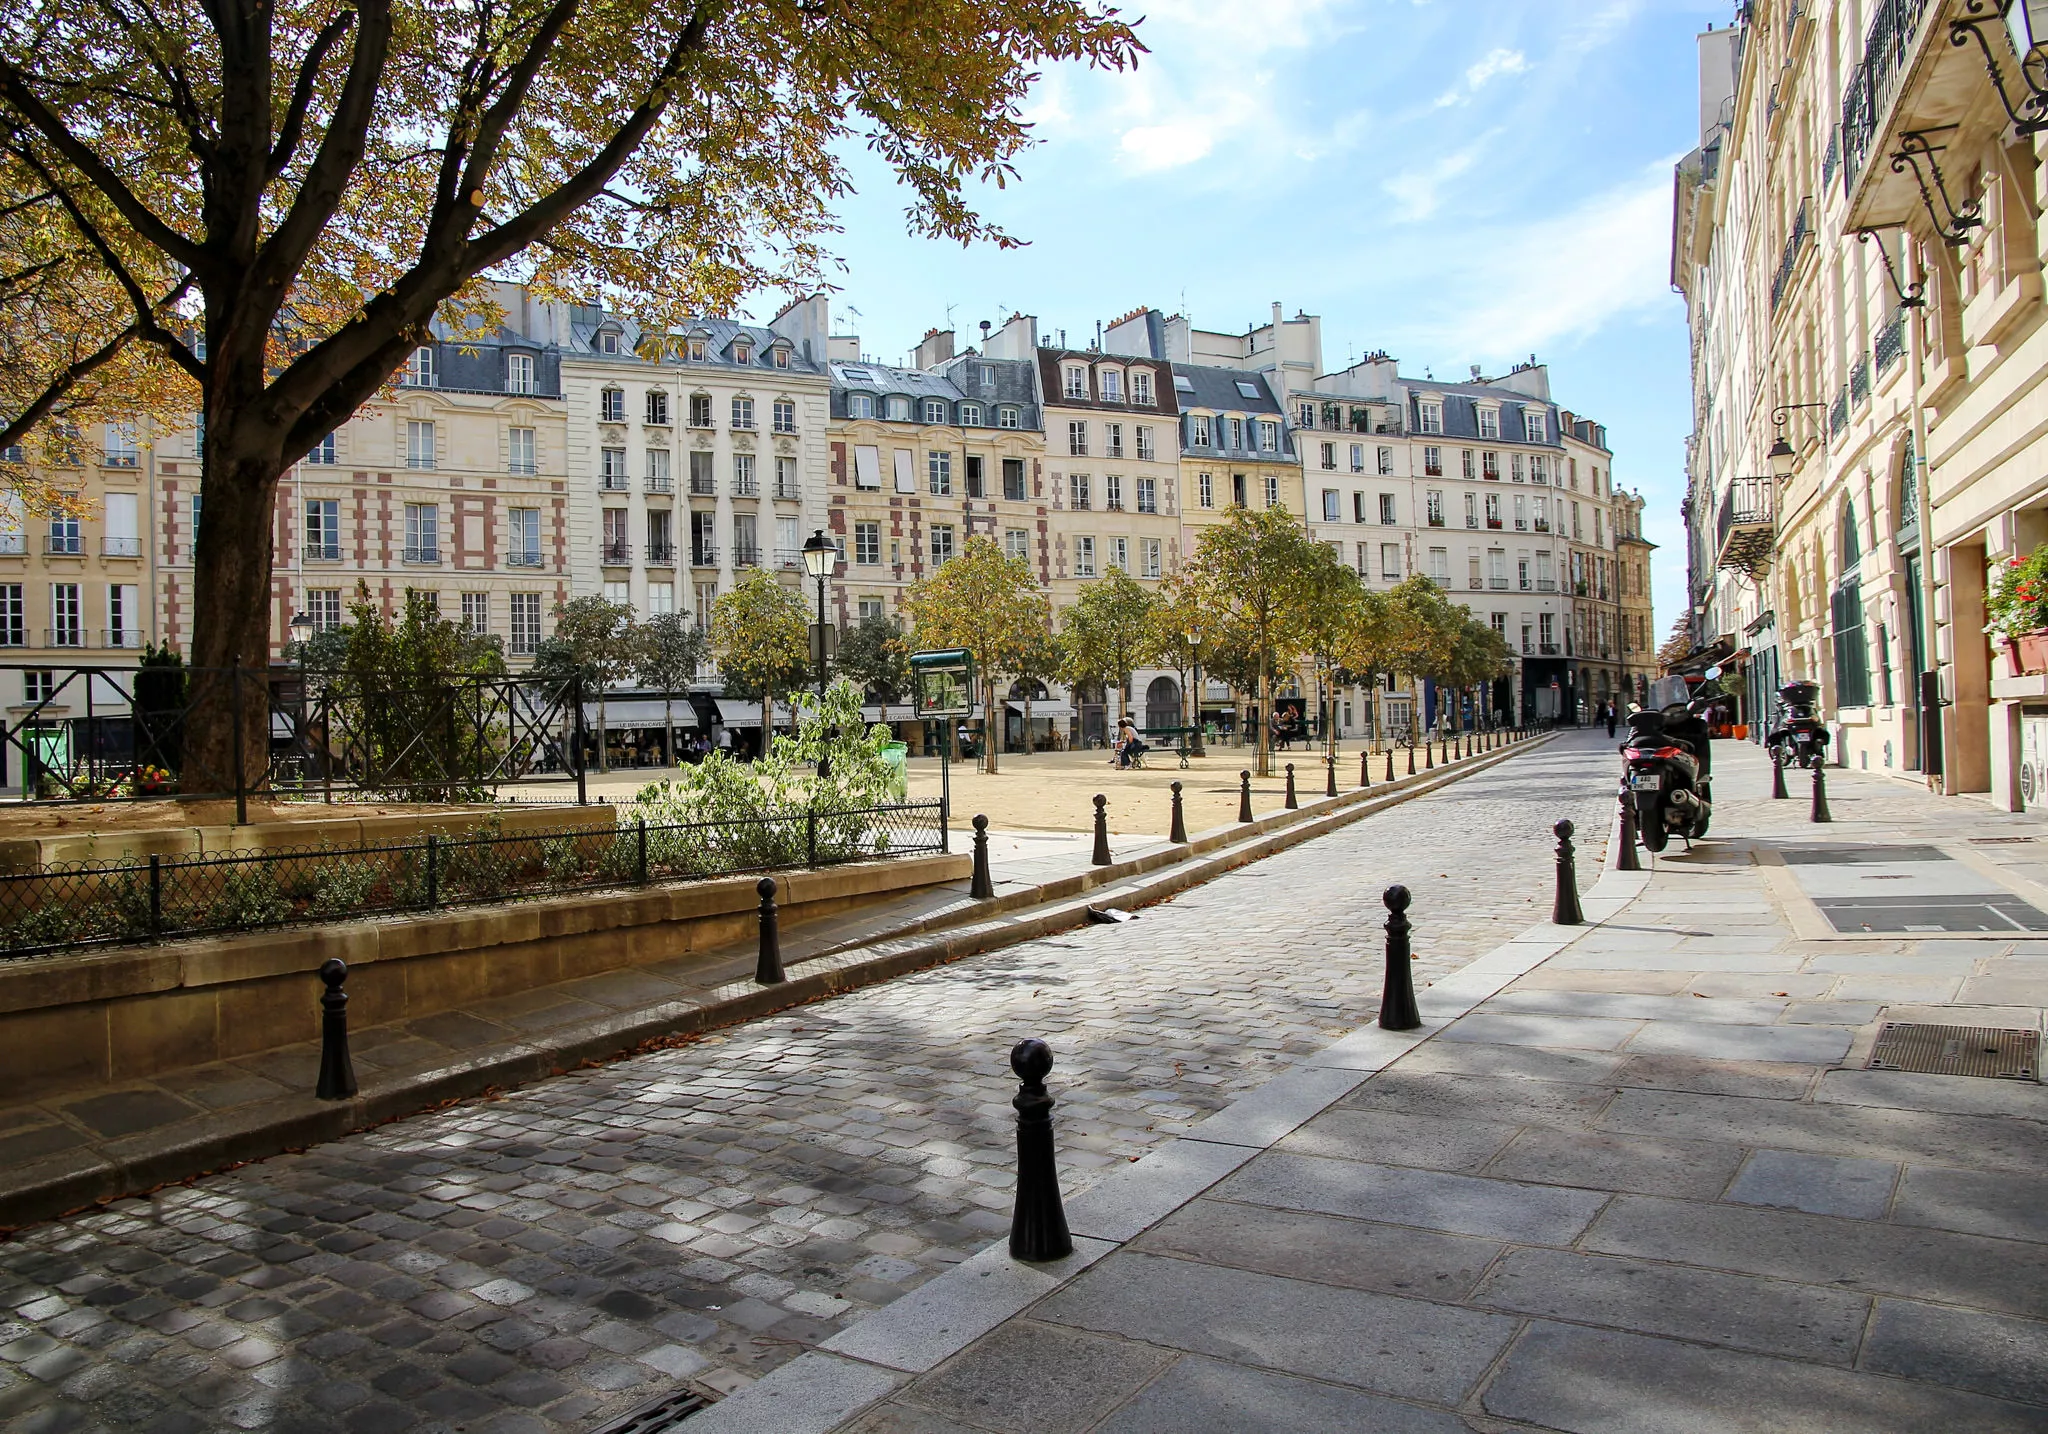 Dauphin Square in France, Europe | Architecture - Rated 3.6